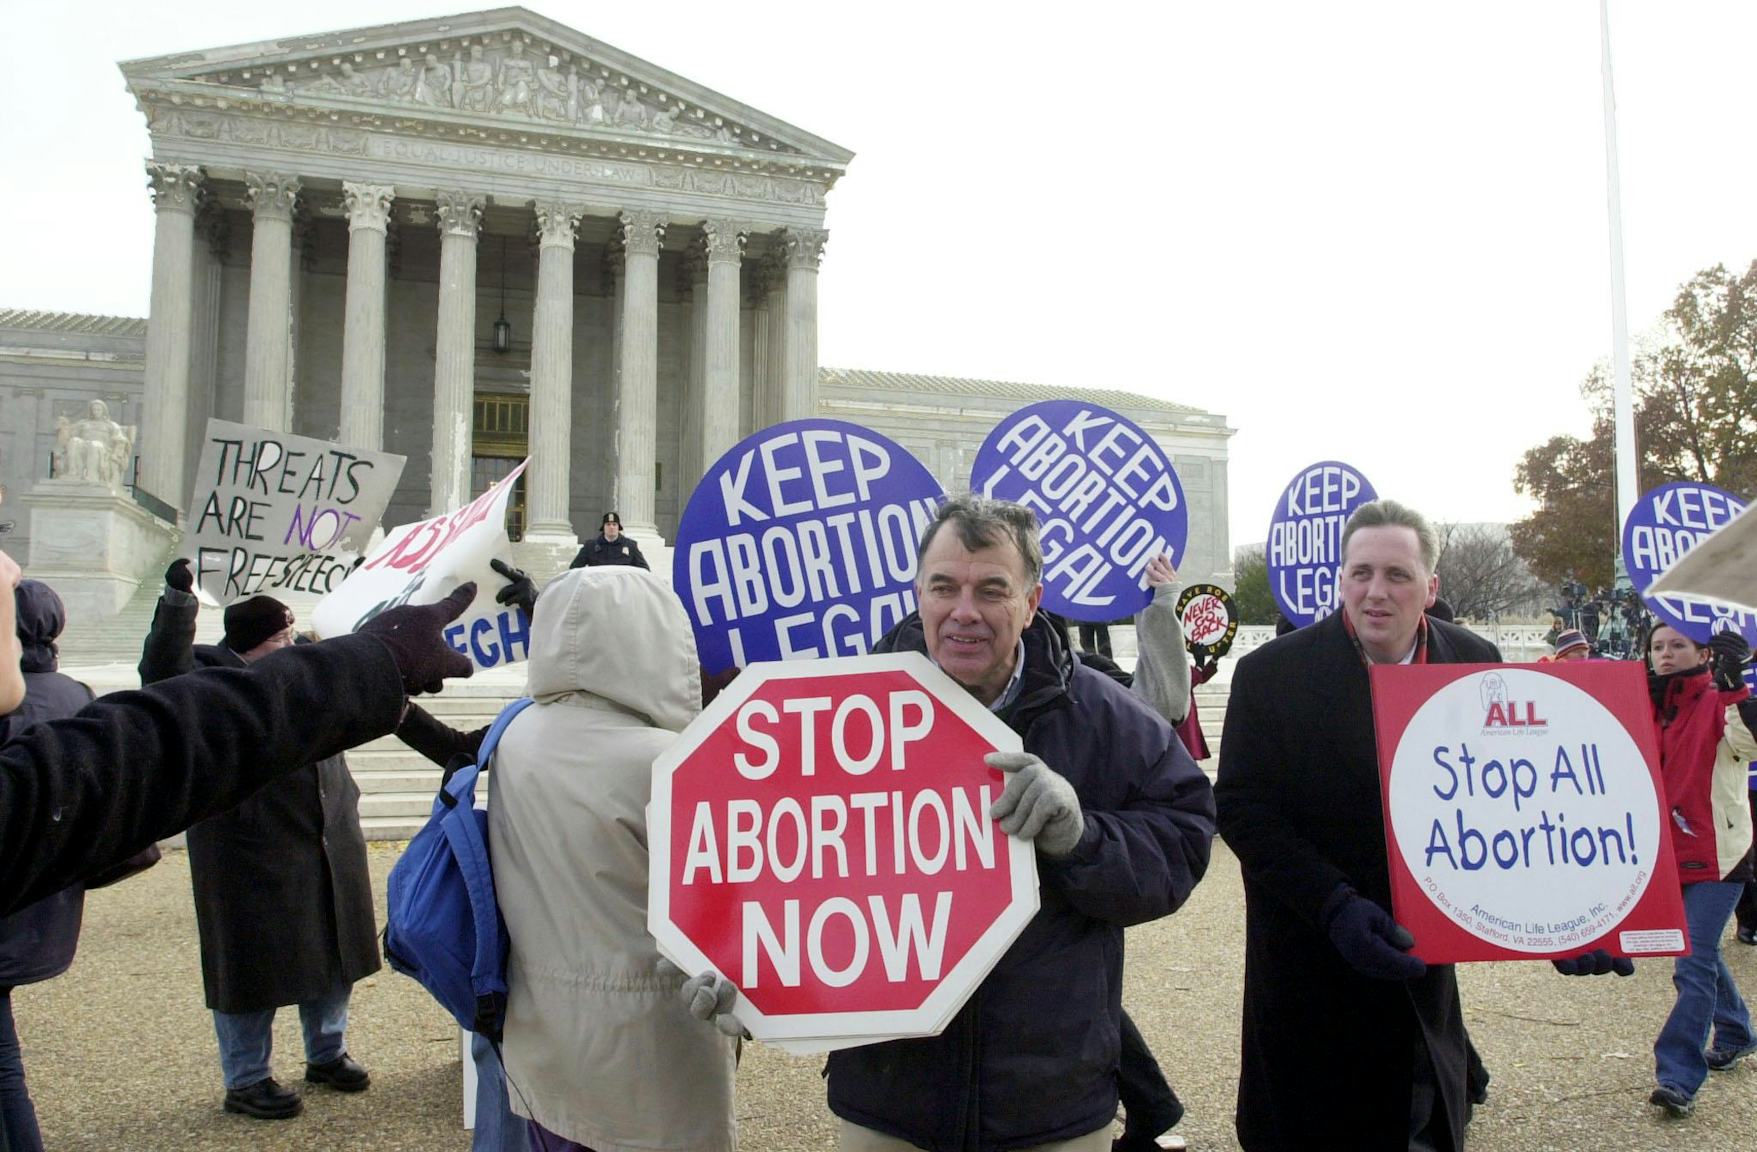 More Than 200 Gop Lawmakers Asked The Supreme Court To Overturn Roe V Wade